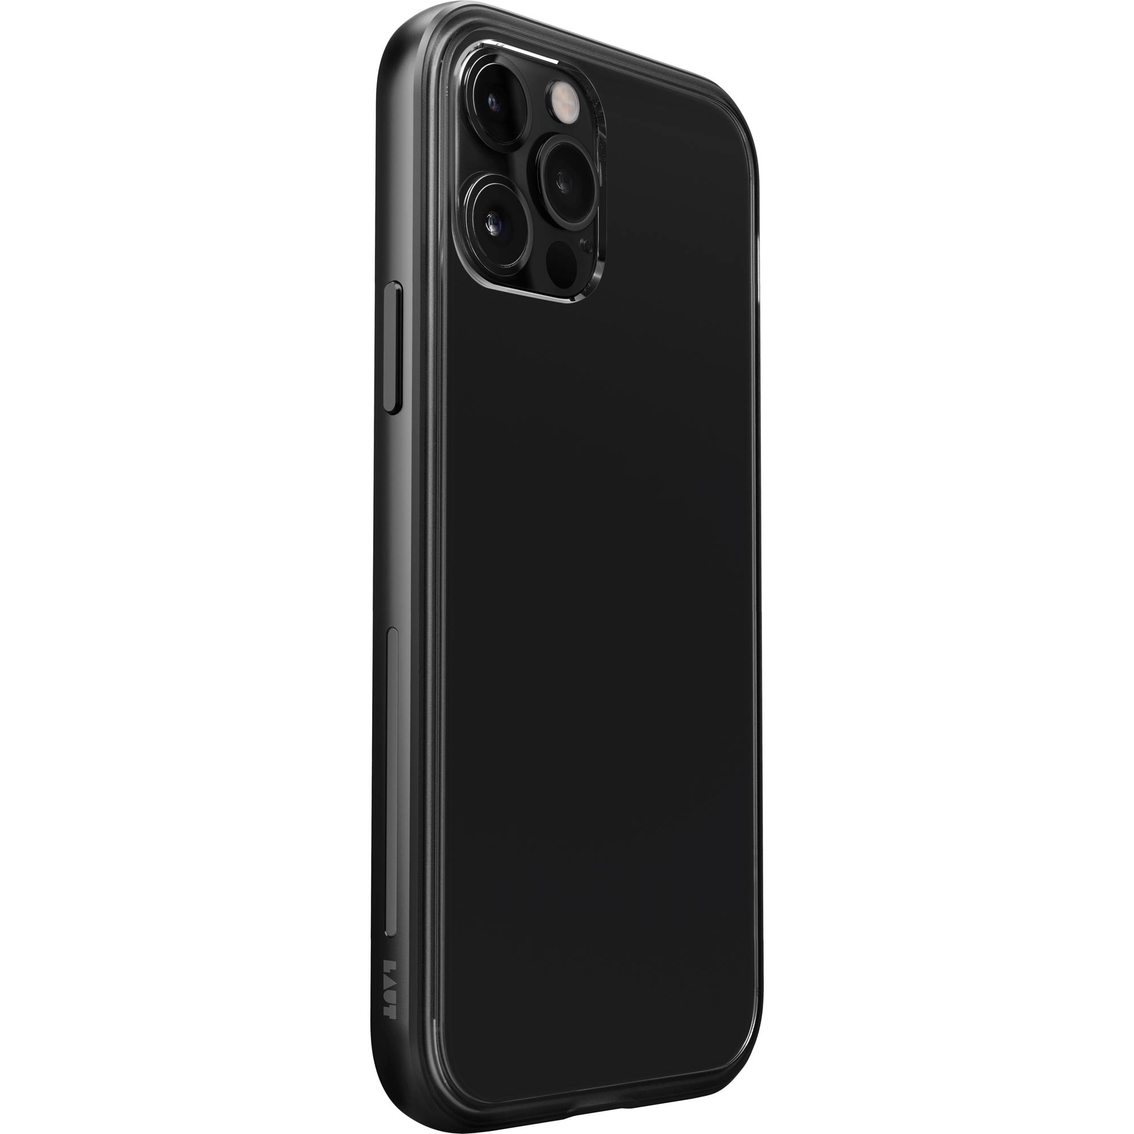 LAUT Design USA Exoframe Case for iPhone 12 Pro Max - Image 4 of 5